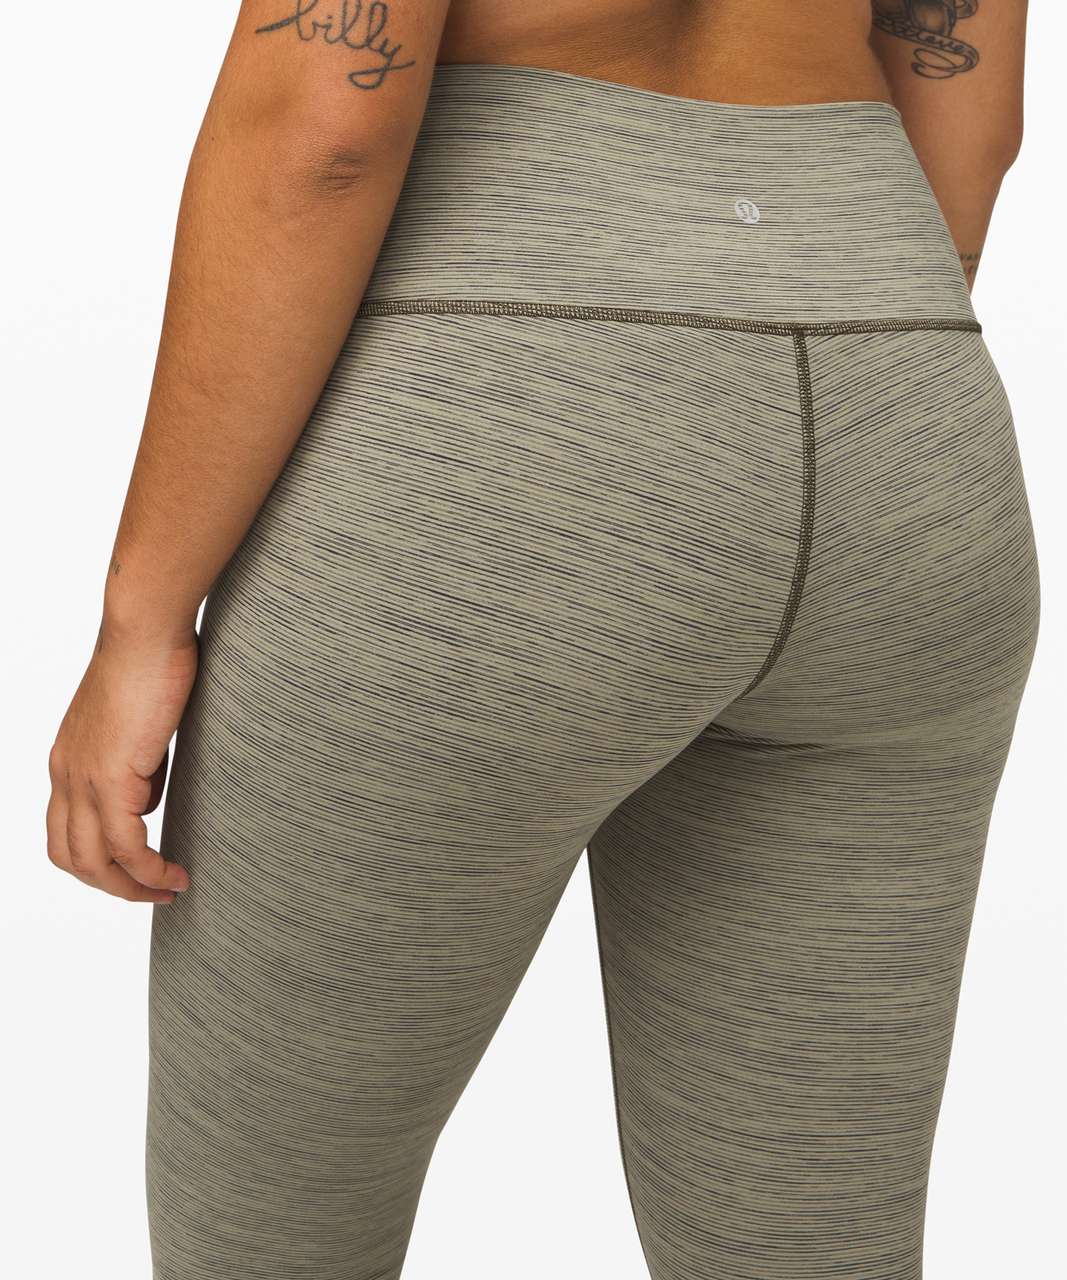 Lululemon Wunder Under High-Rise Tight 25" *Full-On Luon - Wee Are From Space Sage Dark Olive